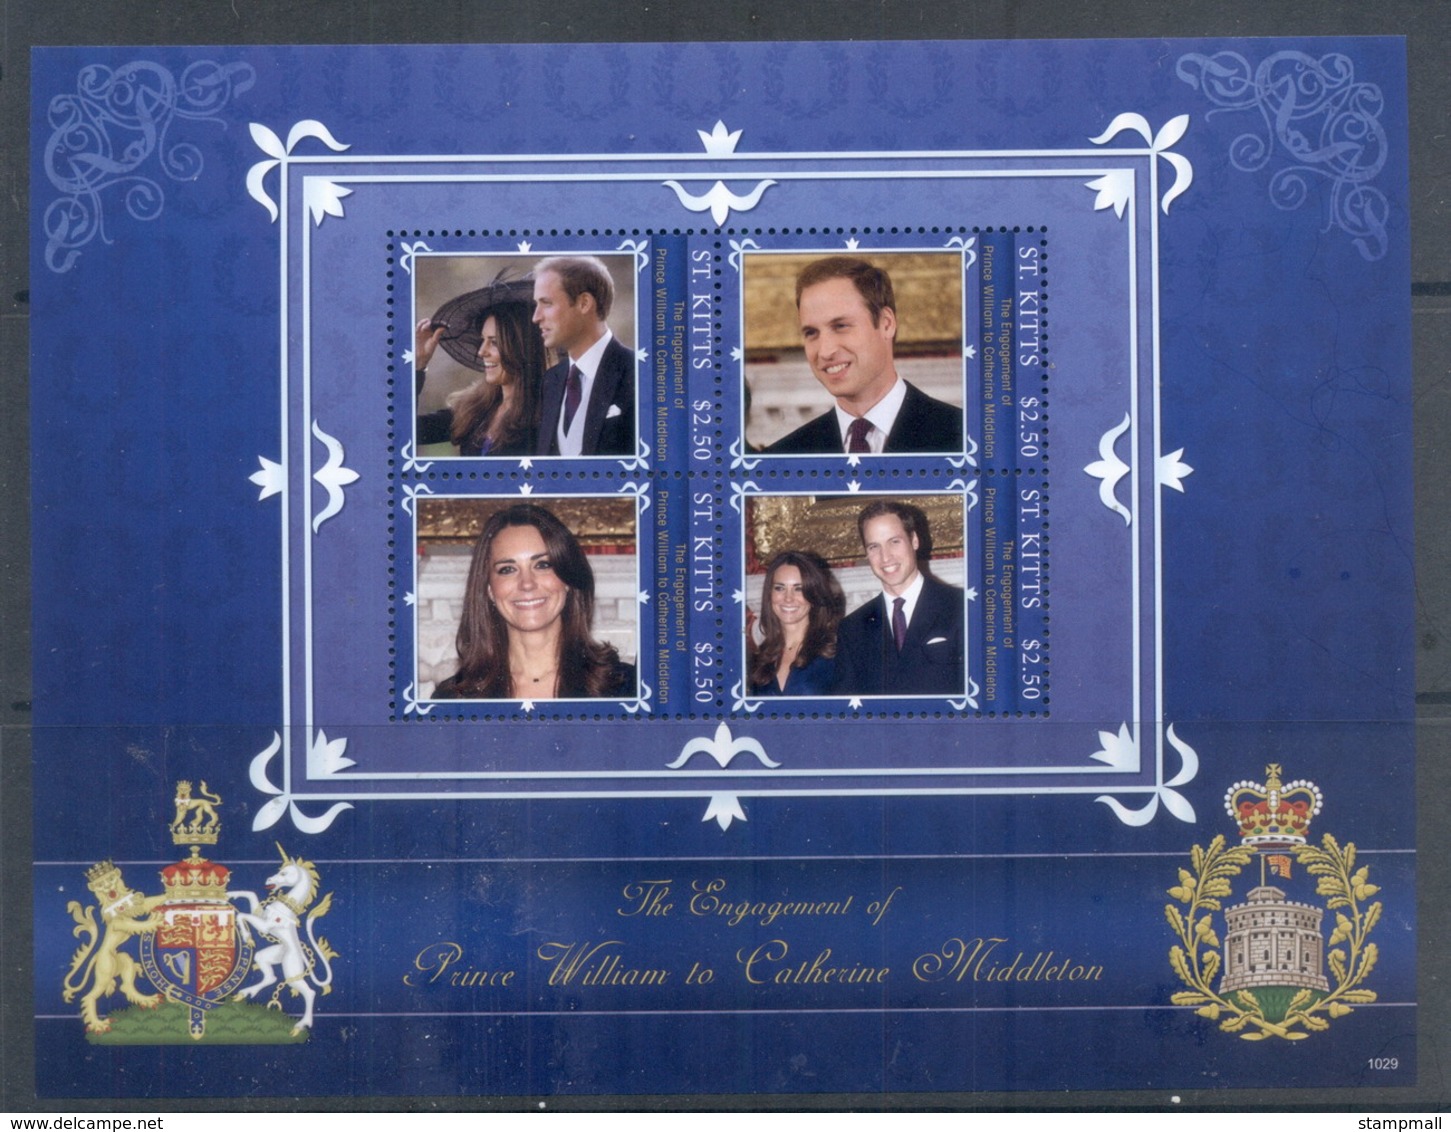 St Kitts 2011 Royal Engagement William & Kate #1029 $2.50 MS MUH - St.Kitts And Nevis ( 1983-...)